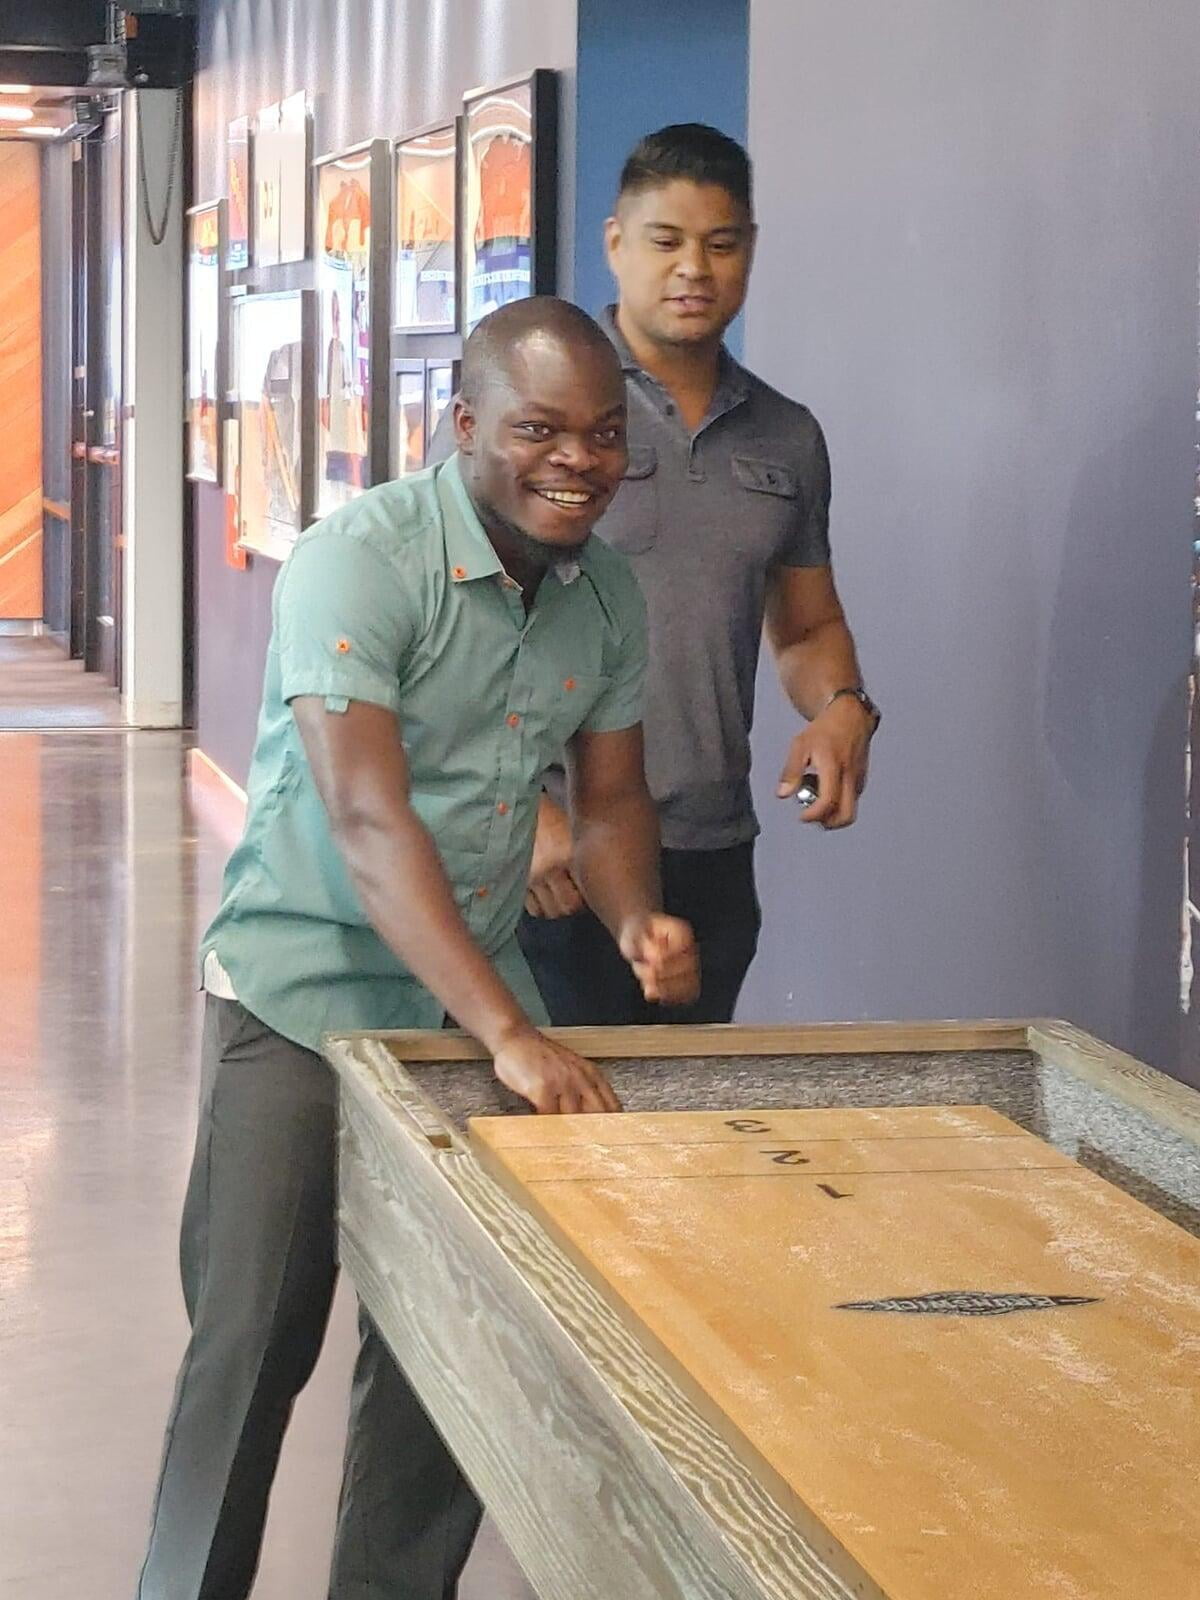 Sean Puno and Olivier Matendo playing a table game together.